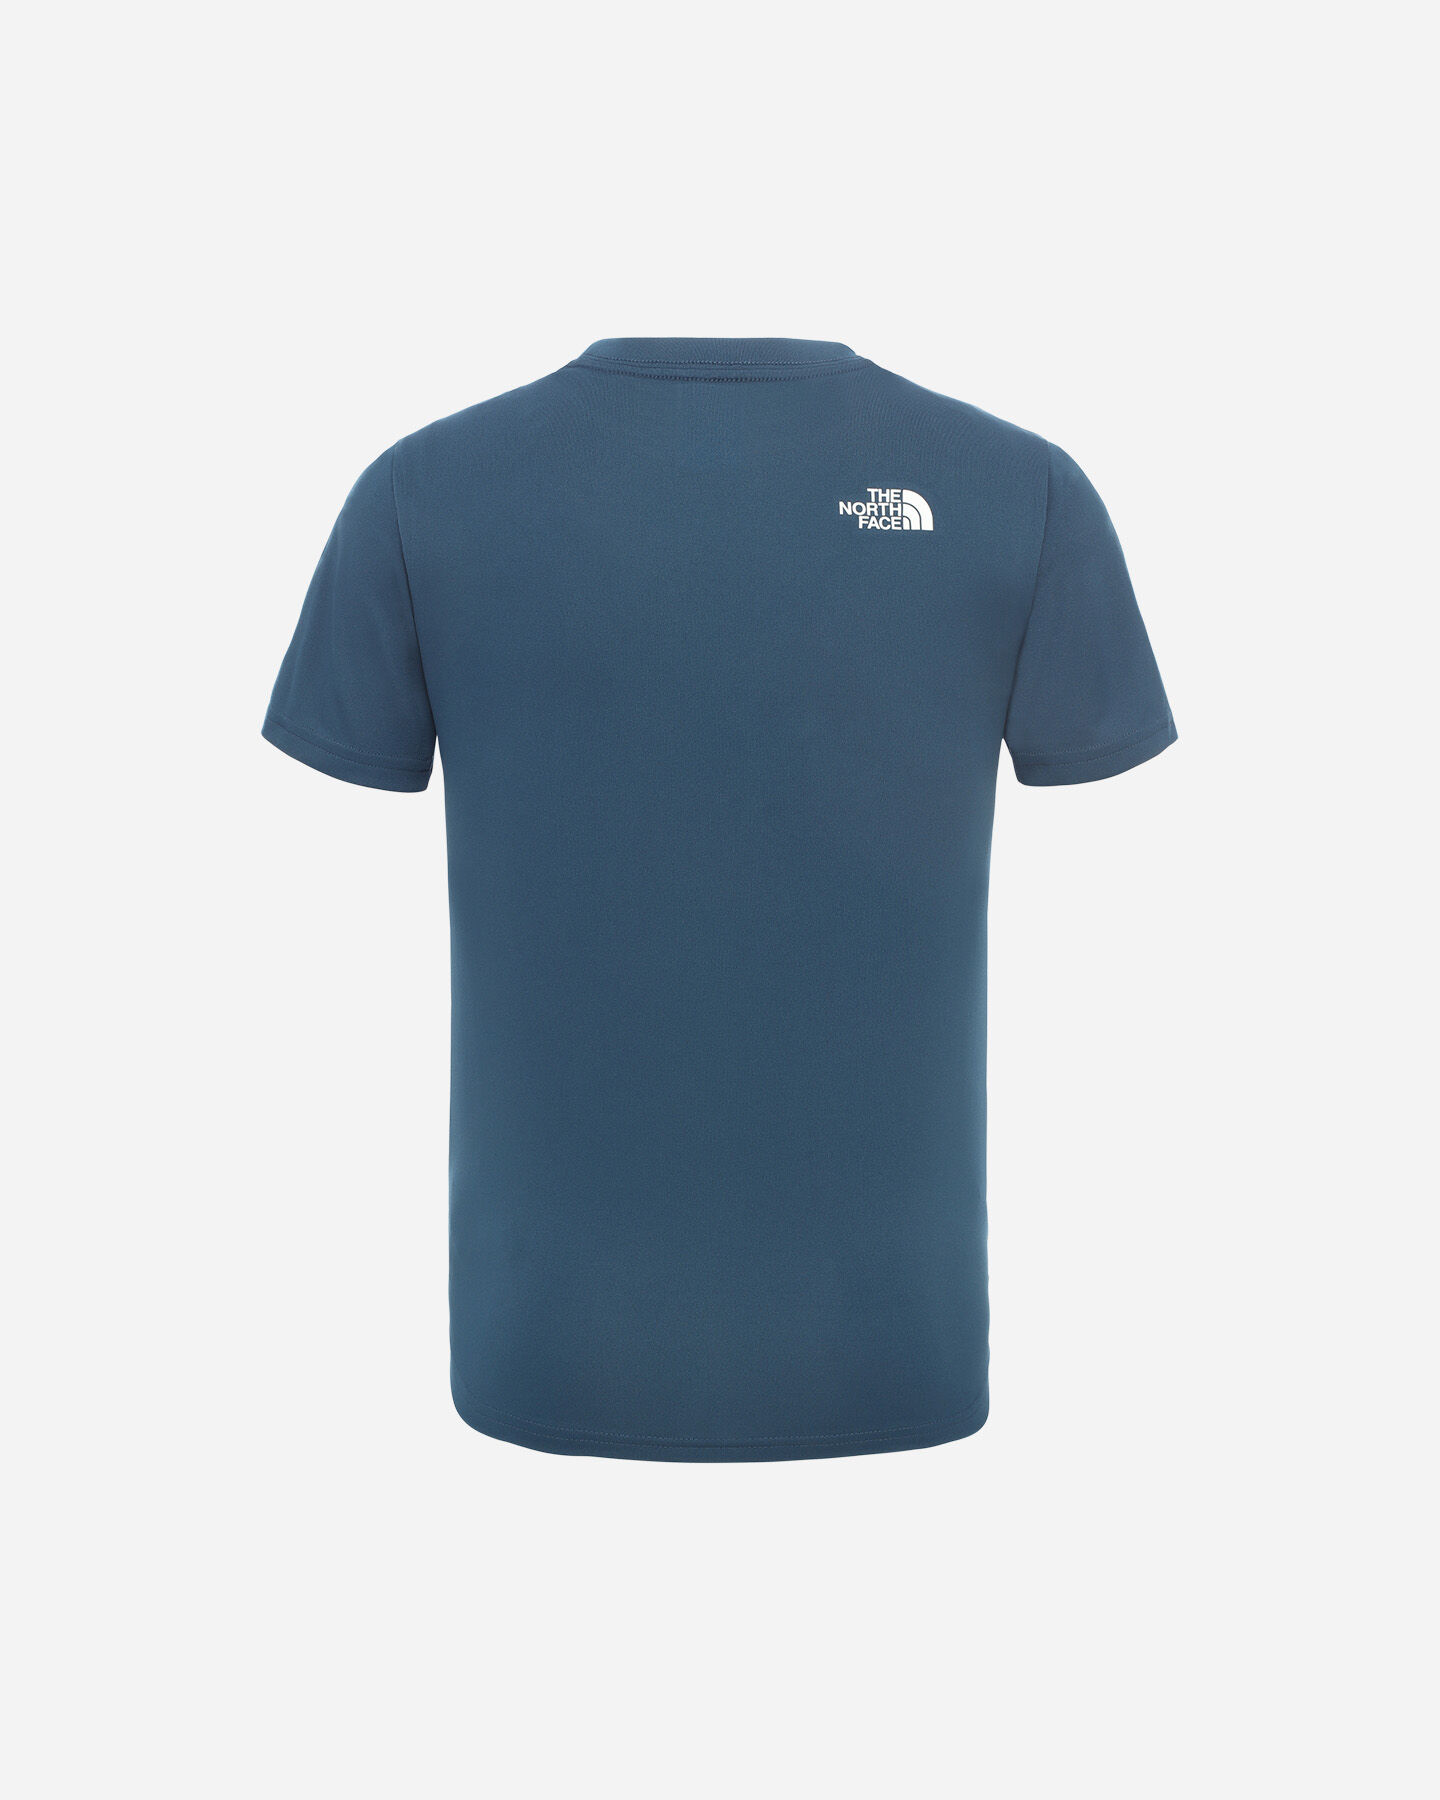  T-Shirt THE NORTH FACE REAXION 2.0 JR S5202373|N4L|XS scatto 1